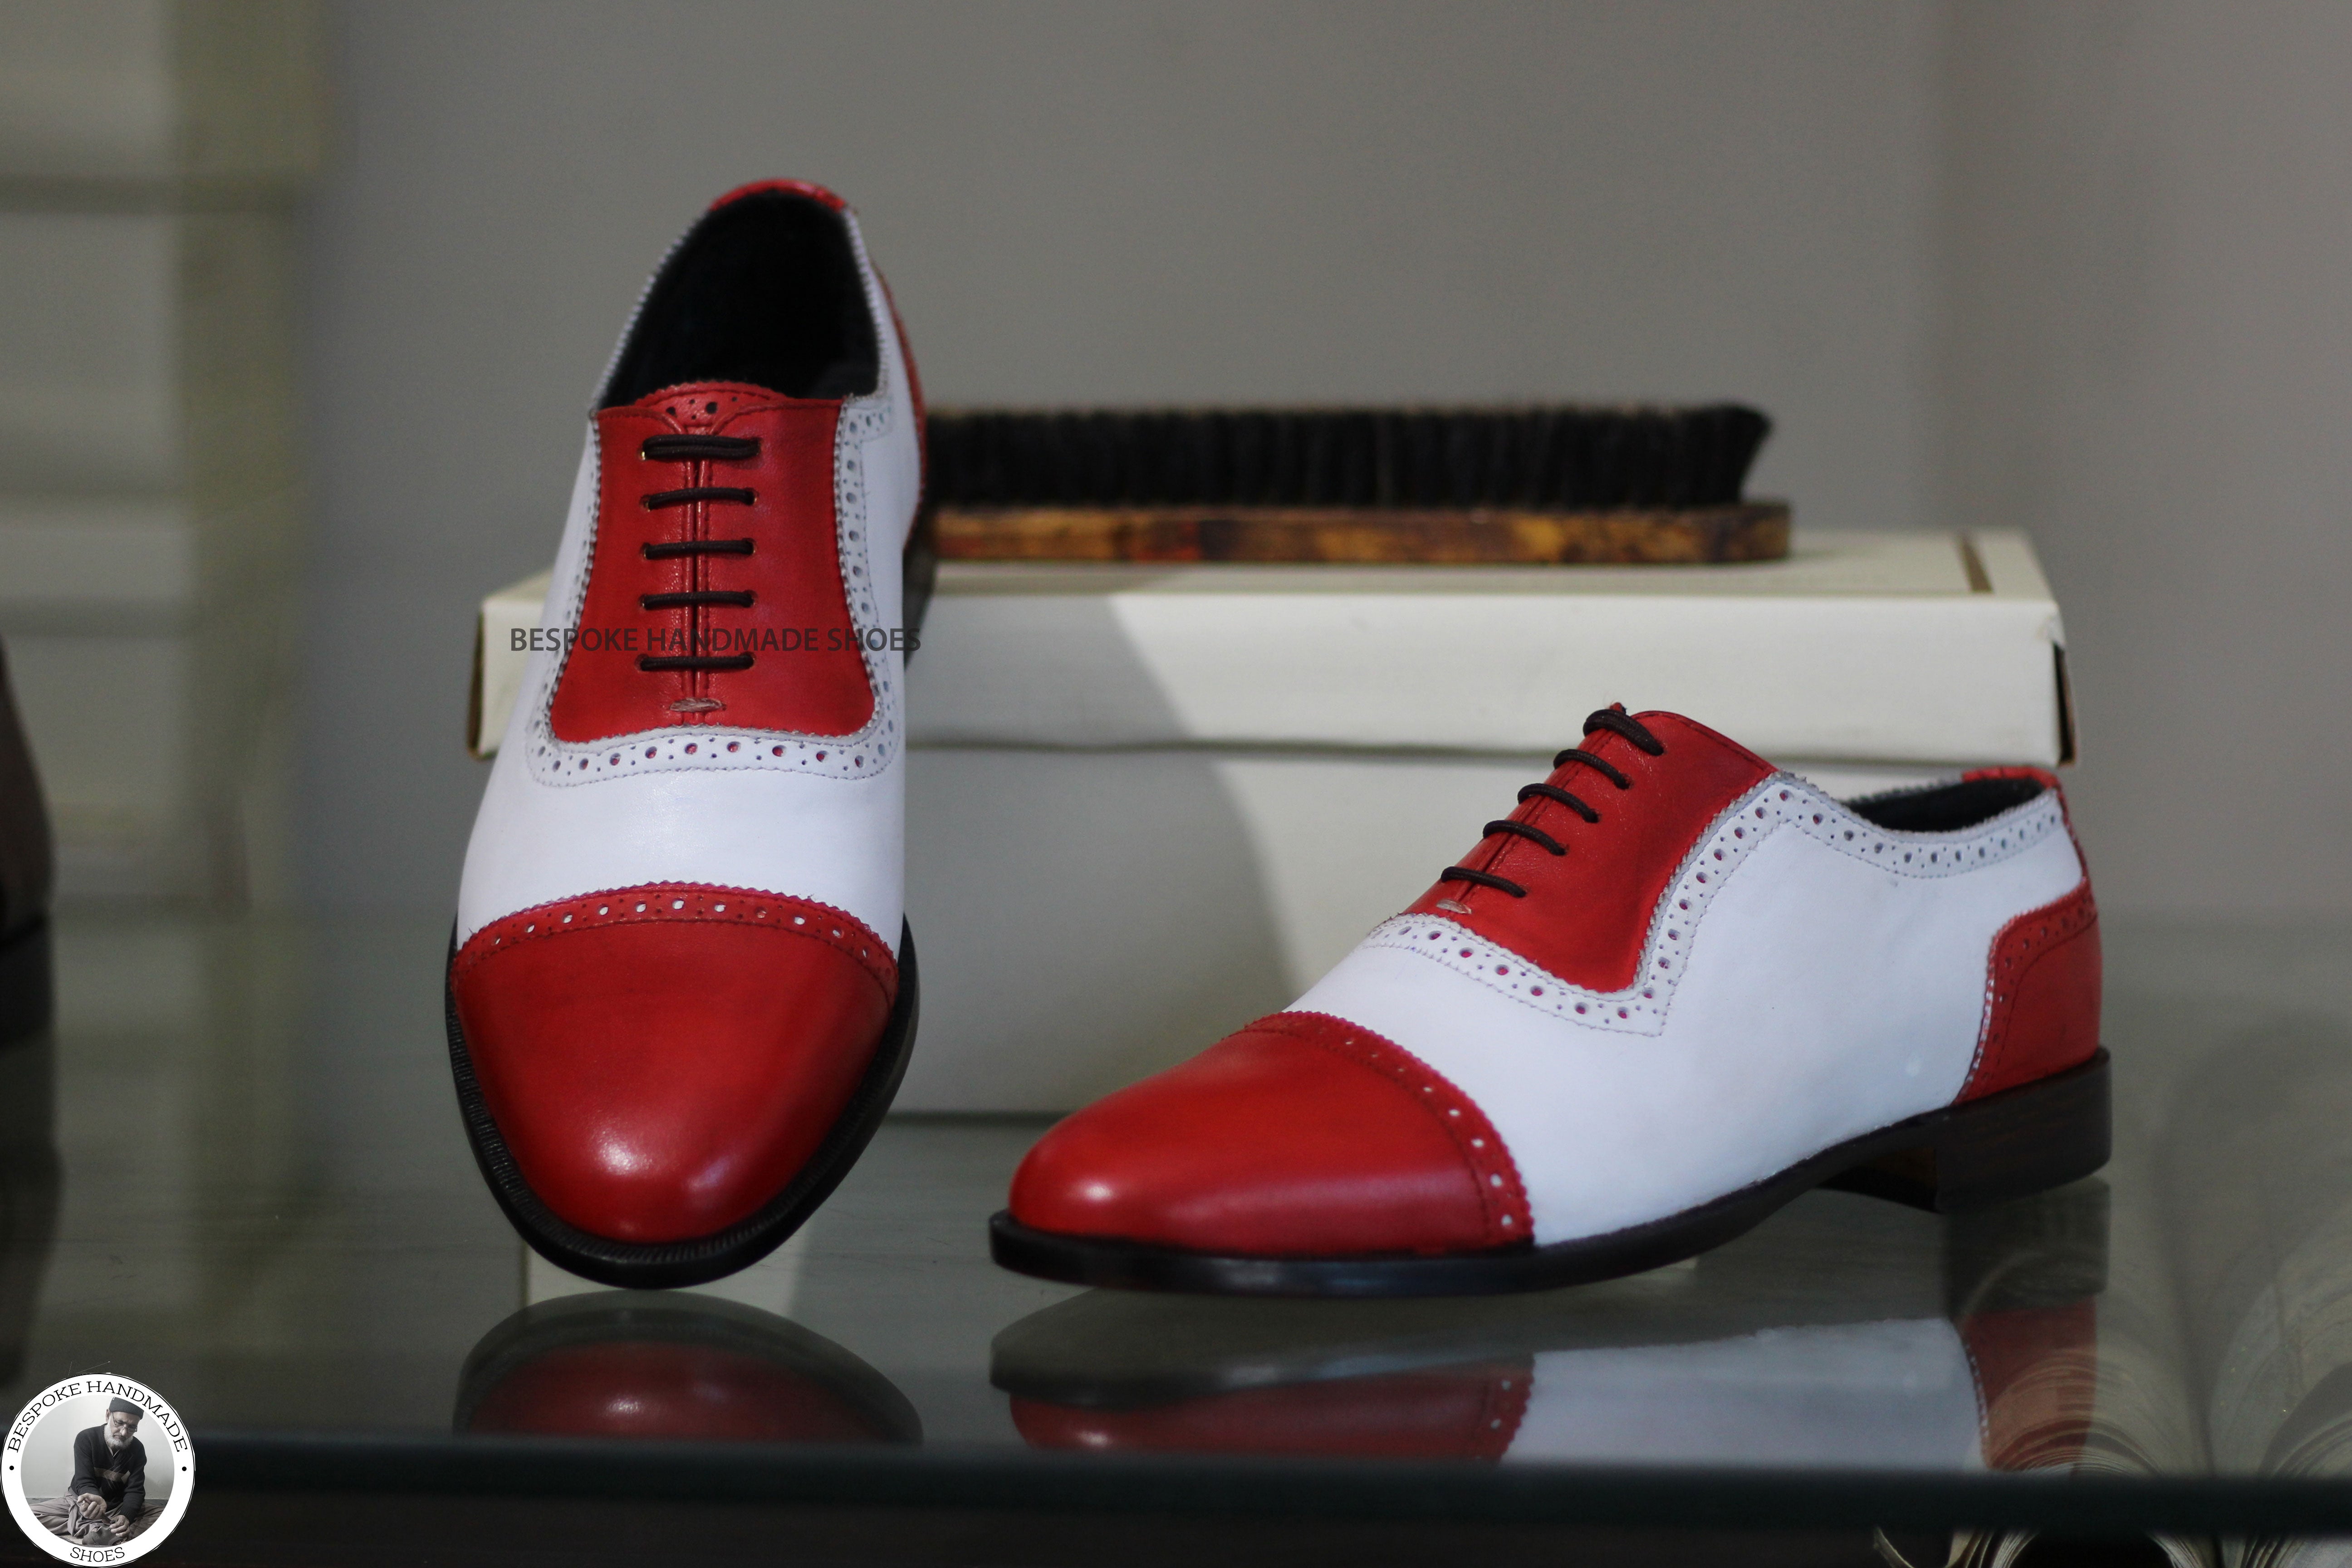 New Men's Handmade White & Red Color Leather Toe Cap Oxford Lace Up Designer Shoes For Men's